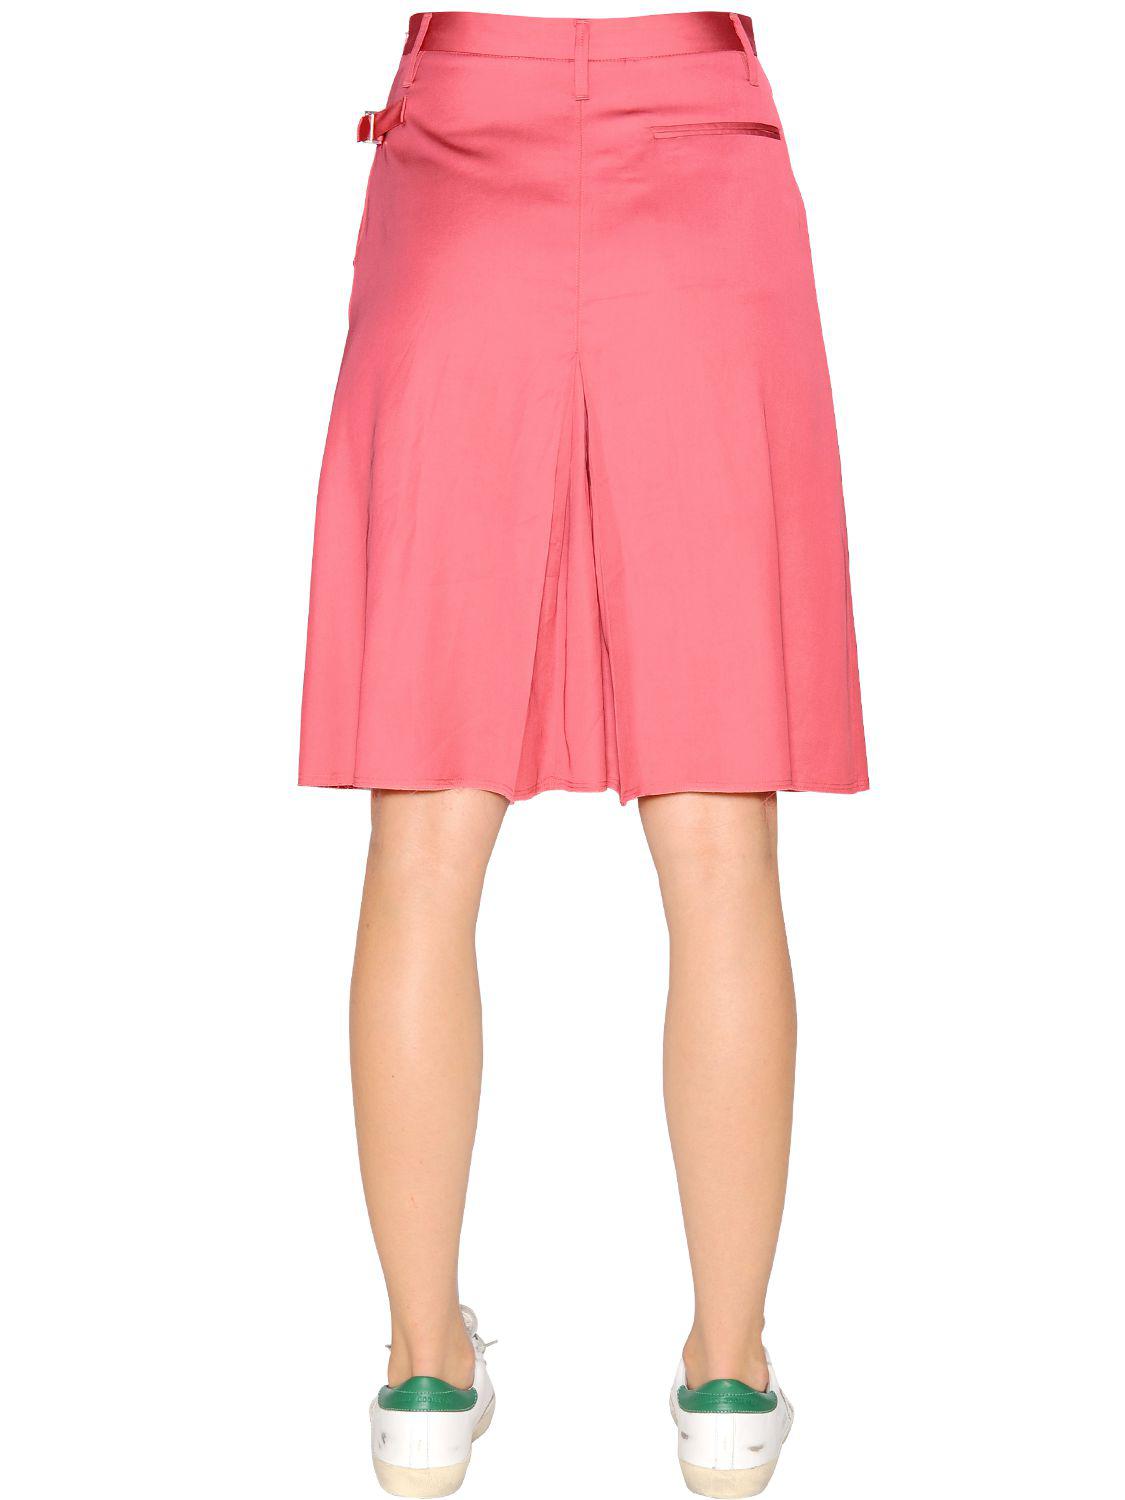 Lyst - Golden Goose Deluxe Brand Pleated Viscose Skirt in Pink